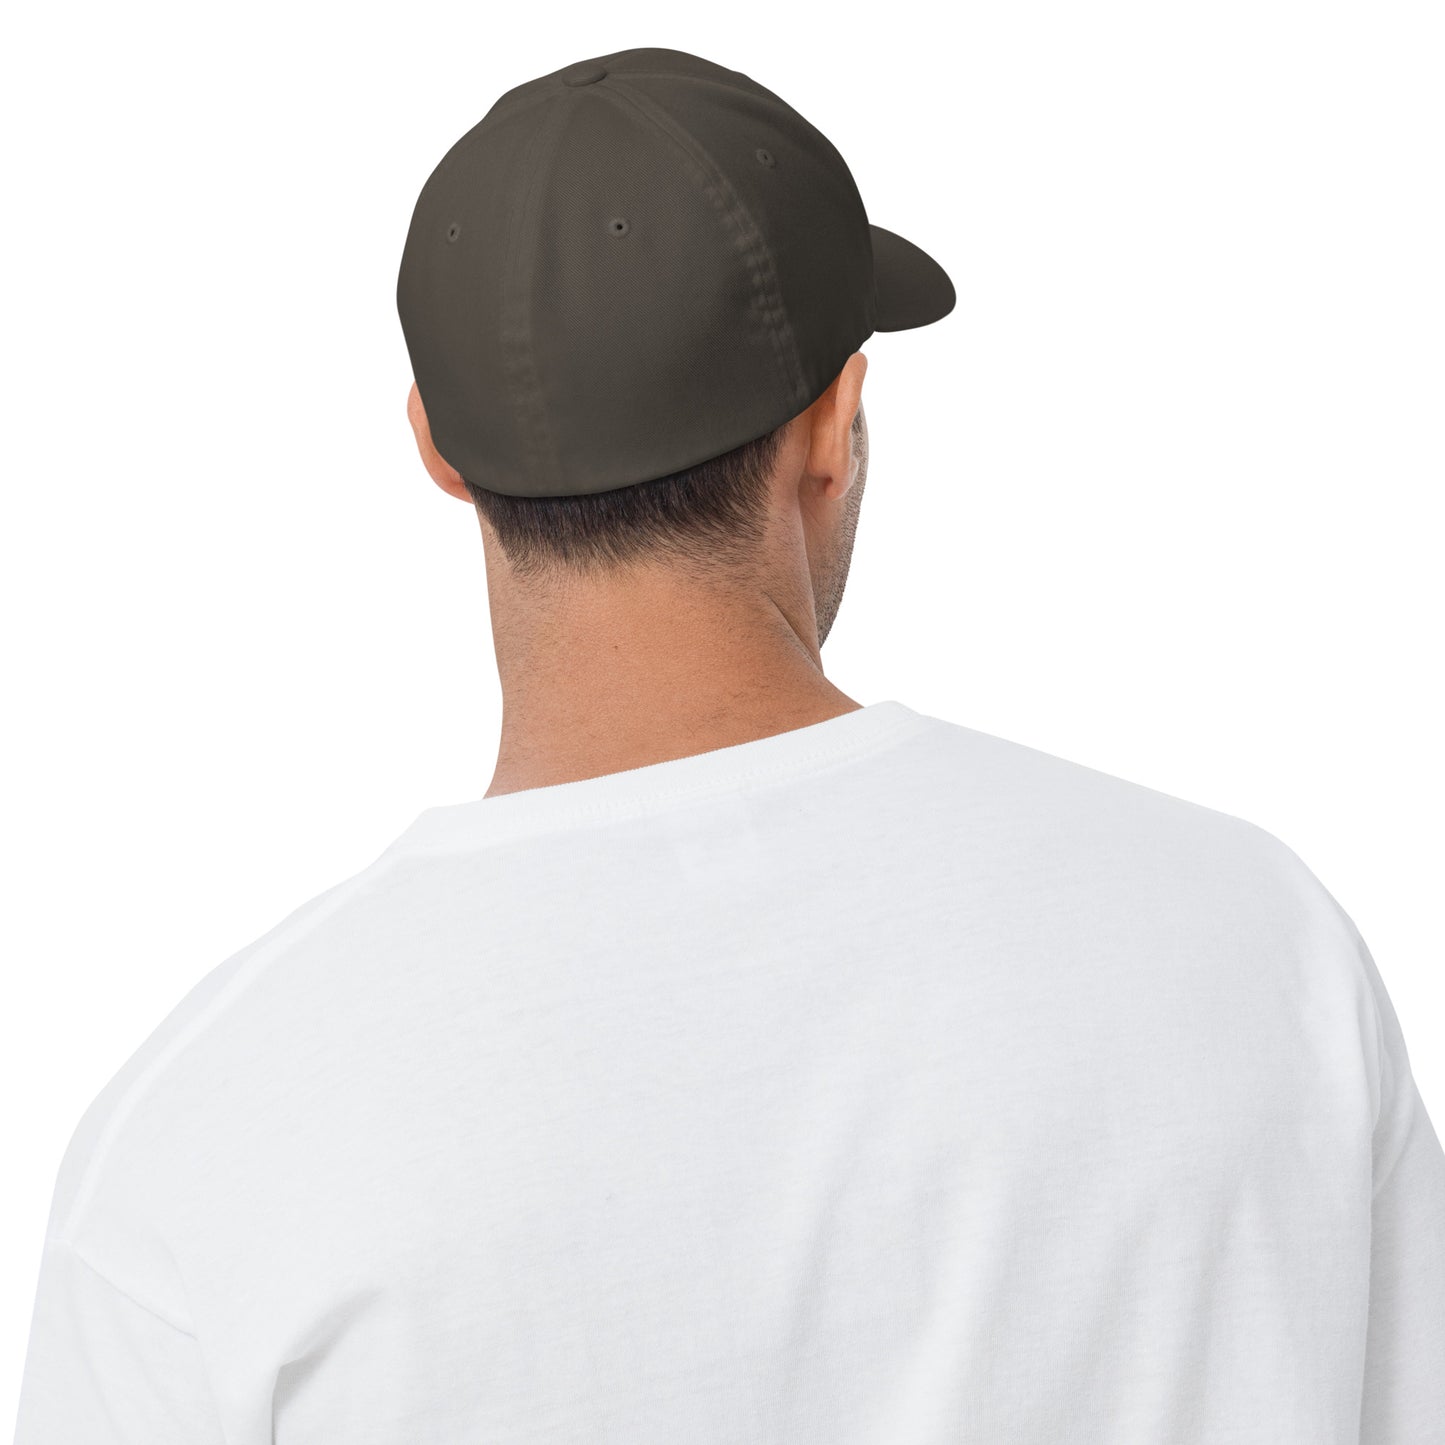 ASO Structured Twill Cap